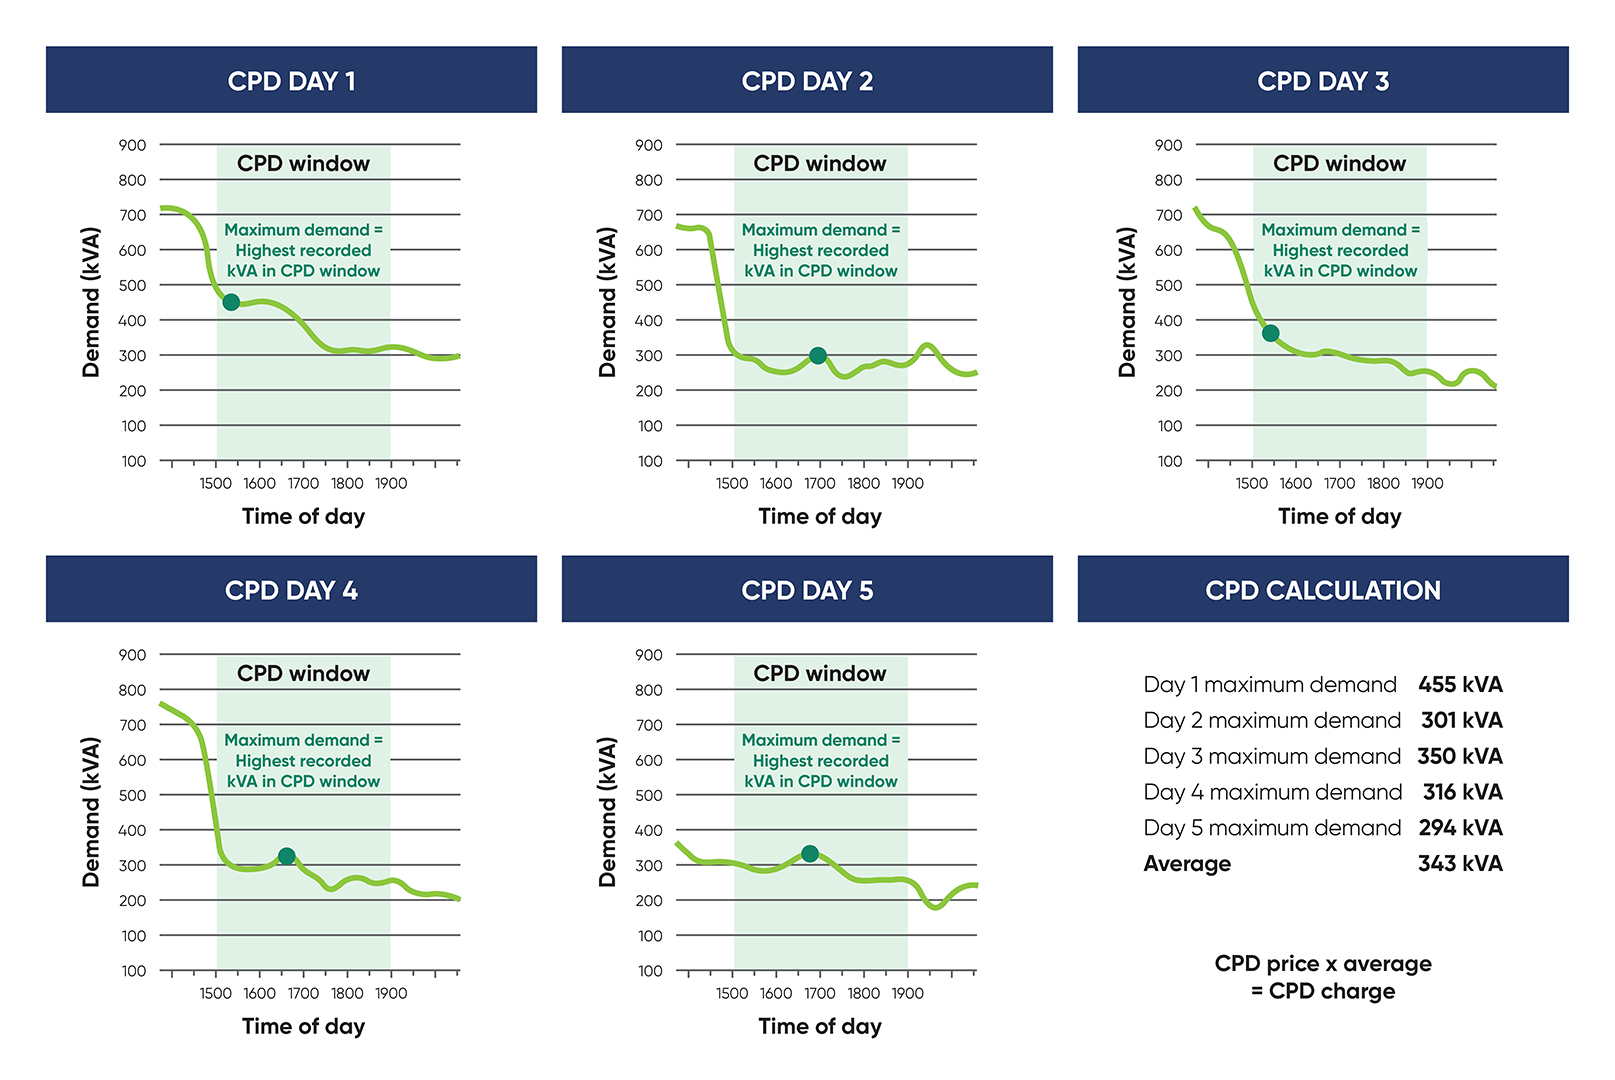 Five graphs showing energy demand peaks on CPD days between 3pm and 7pm